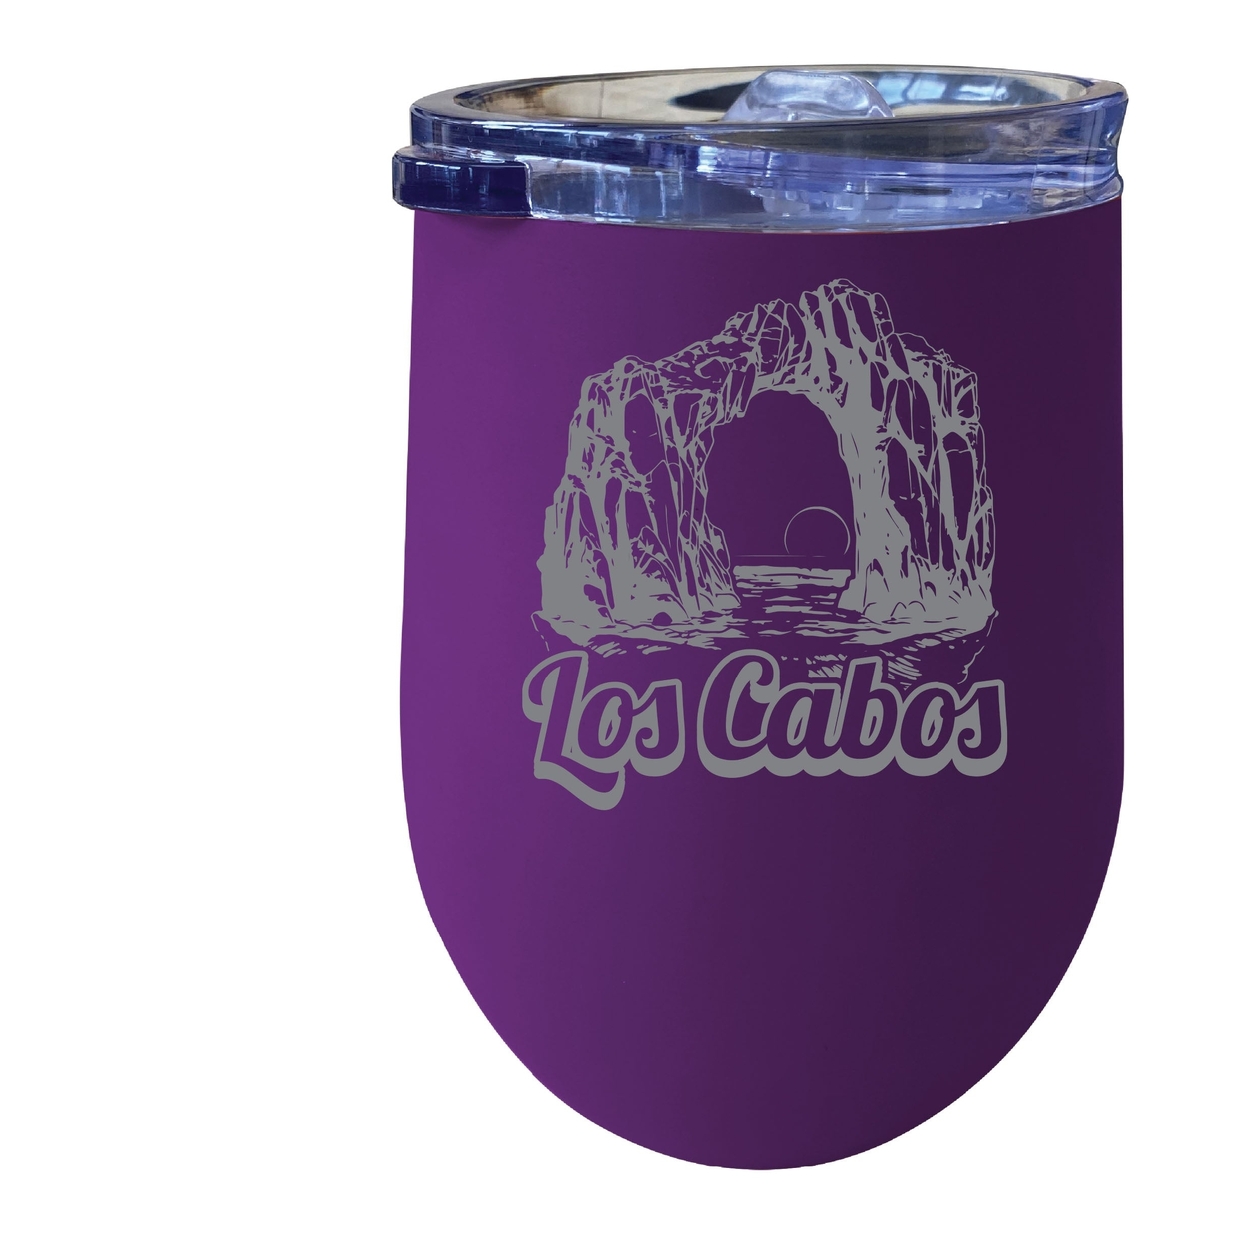 Los Cabos Mexico Souvenir 12 Oz Engraved Insulated Wine Stainless Steel Tumbler - Purple,,Single Unit